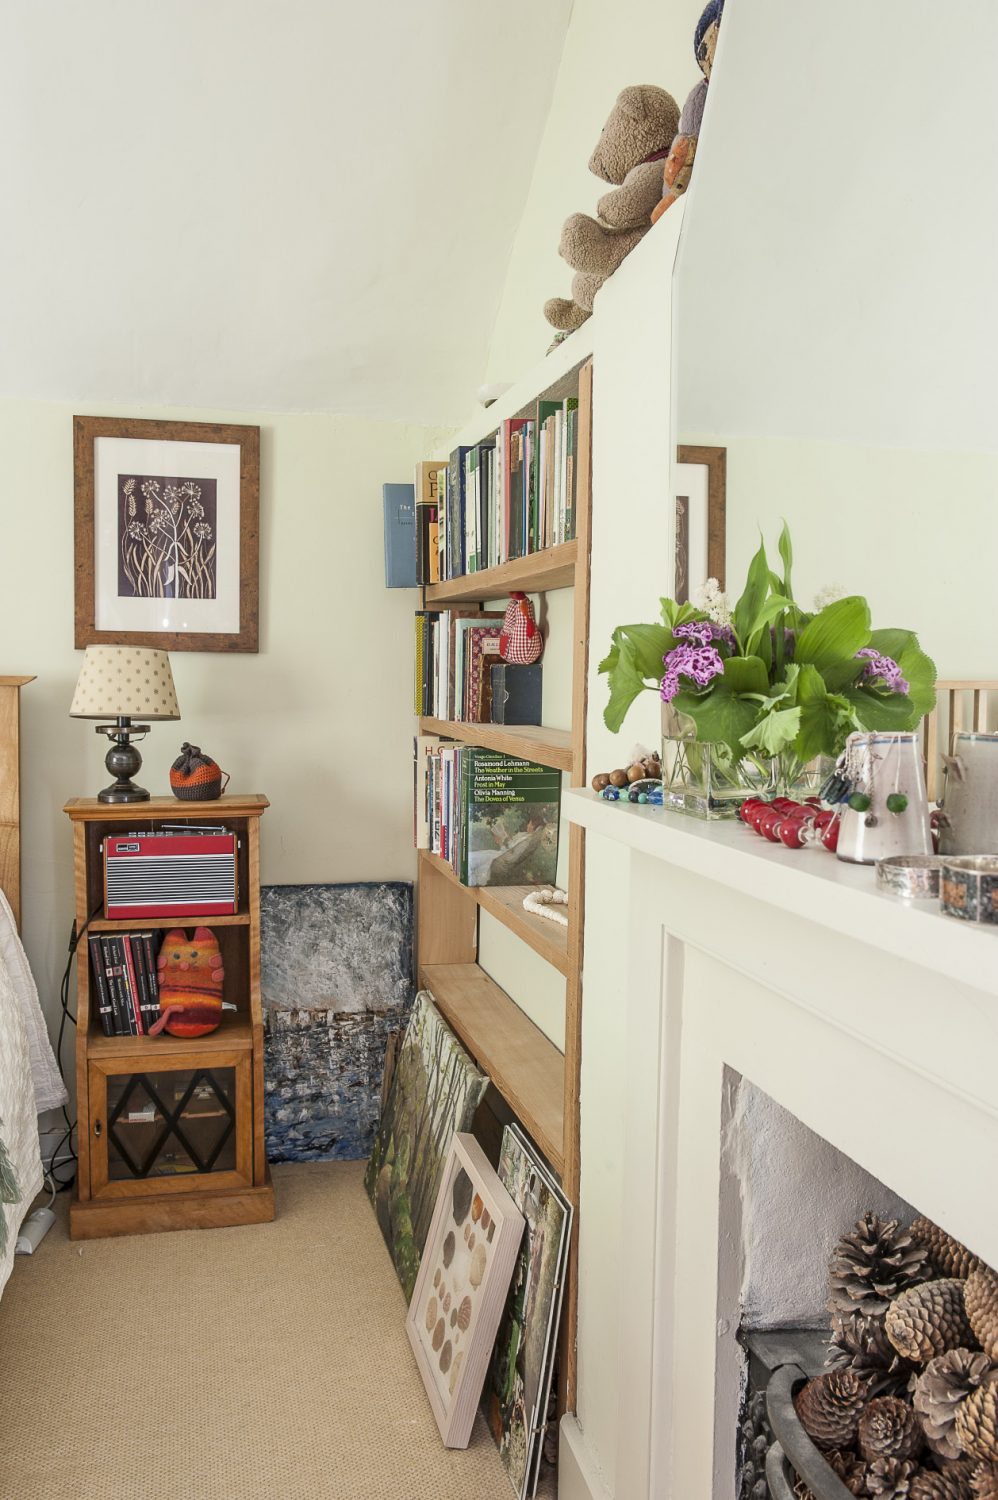 As in most rooms of the house, Wendy has gathered flowers and foliage from the garden which are positioned on the mantelpiece alongside her jewellery